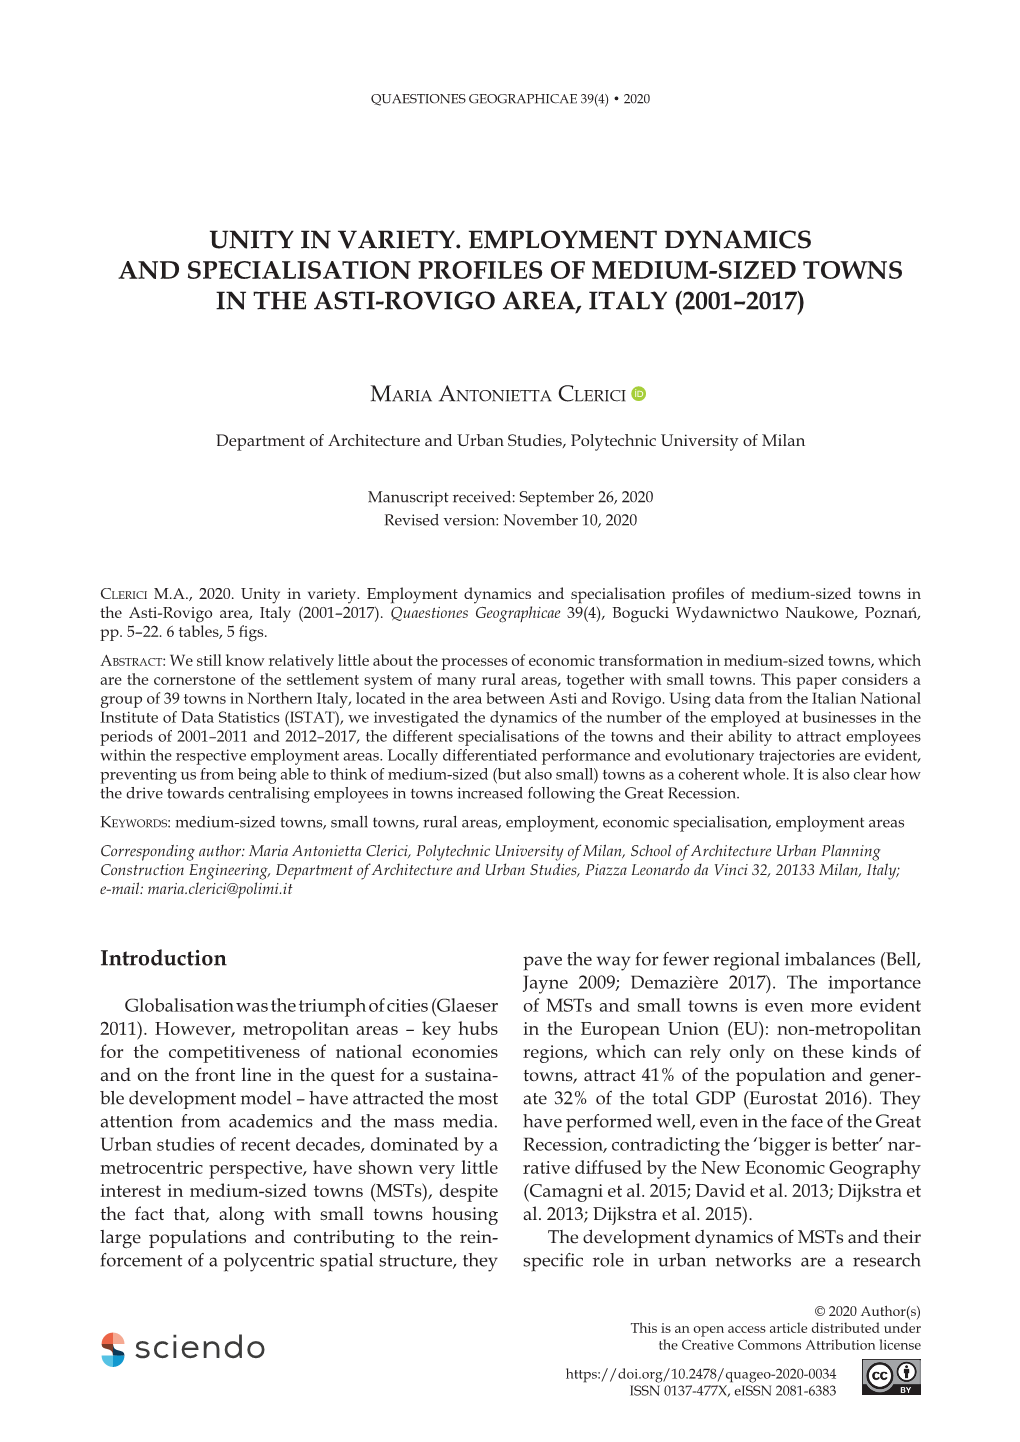 Unity in Variety. Employment Dynamics and Specialisation Profiles of Medium-Sized Towns in the Asti-Rovigo Area, Italy (2001–2017)